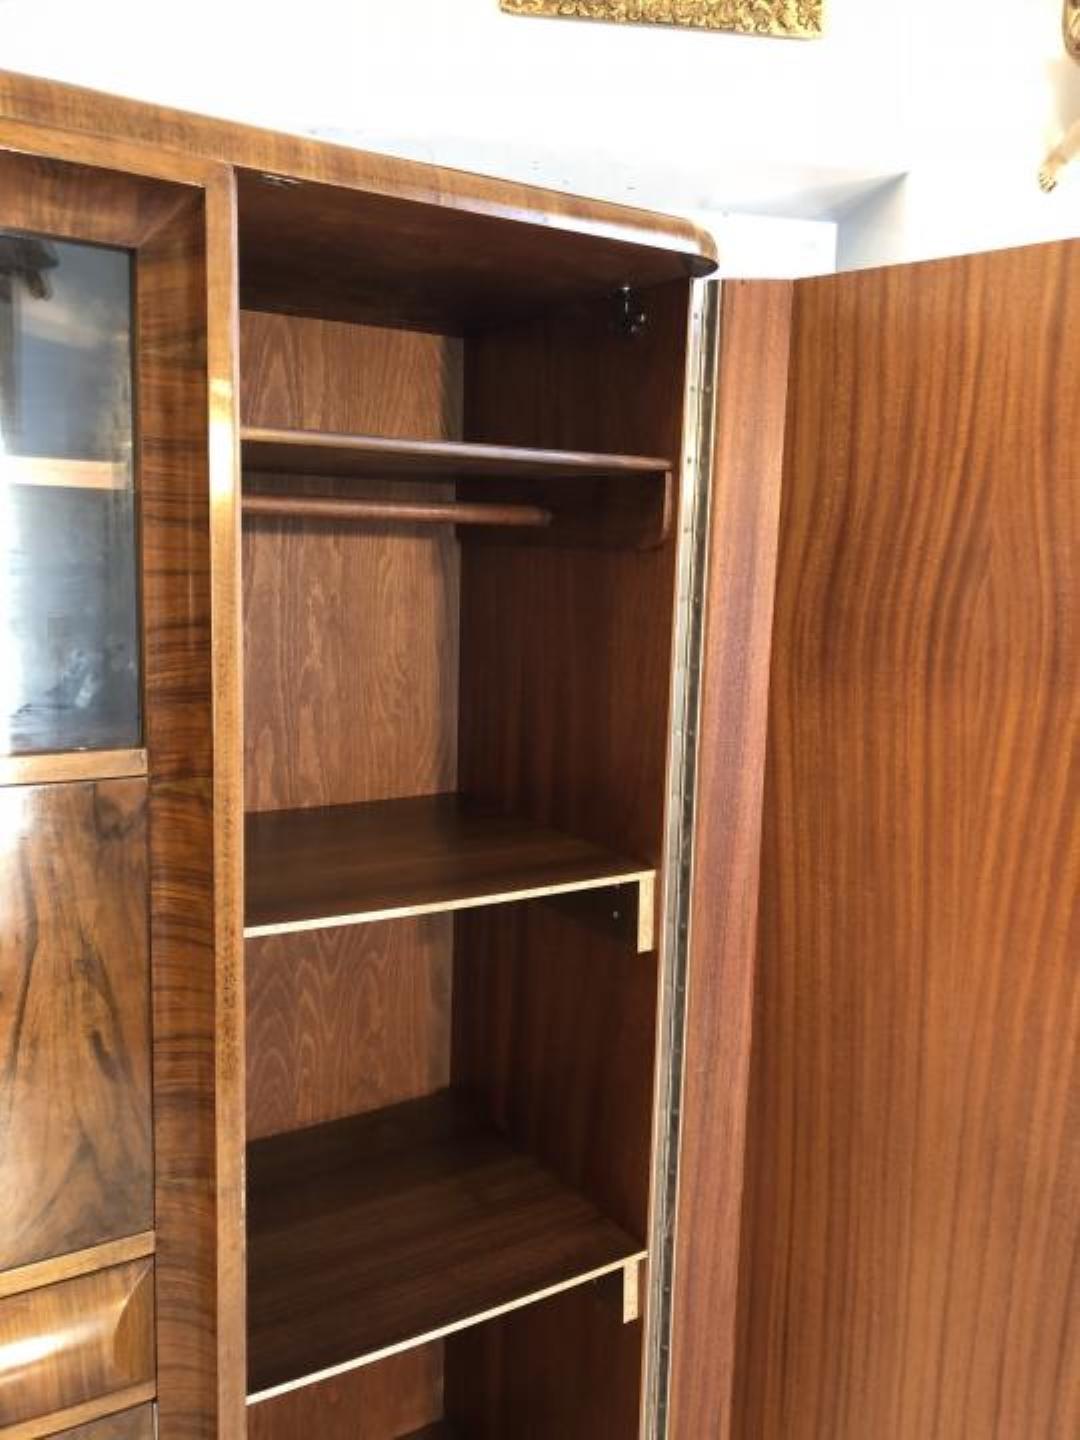 Hand-Crafted Vintage 1930s Book Cabinet with a Stunning Walnut Grain